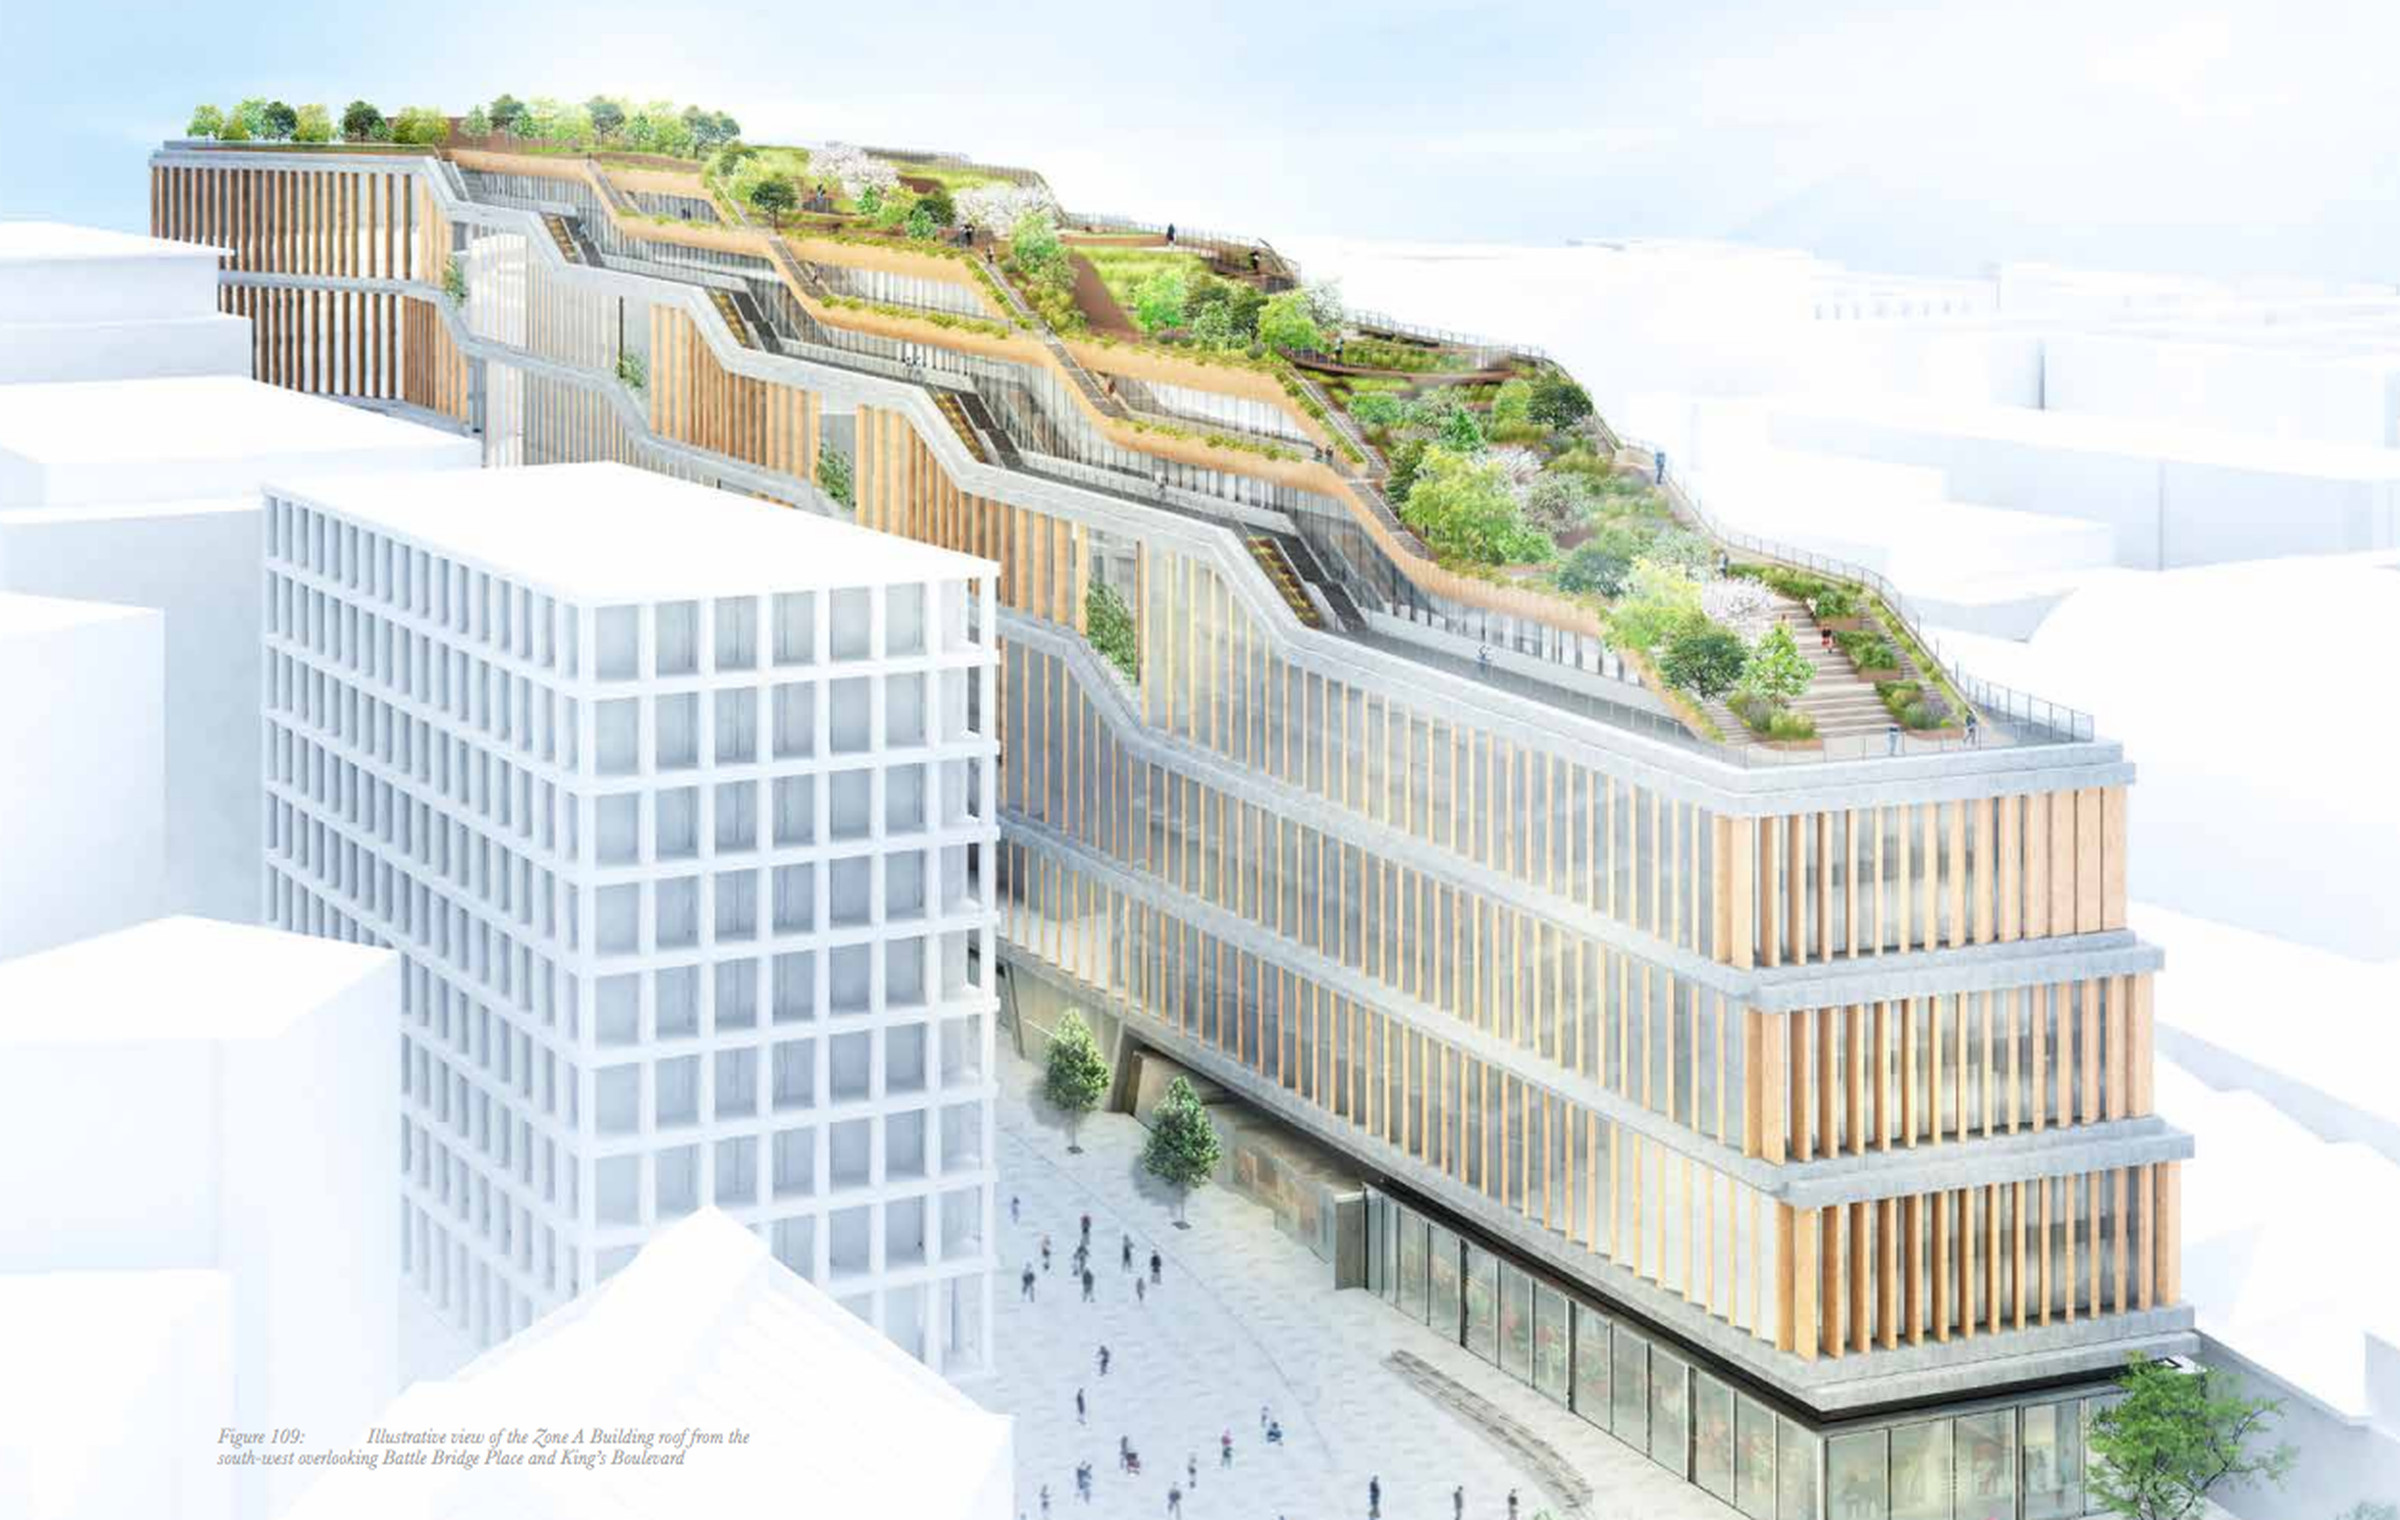 The rooftop garden will be perhaps the most impressive feature of Google’s new London HQ.